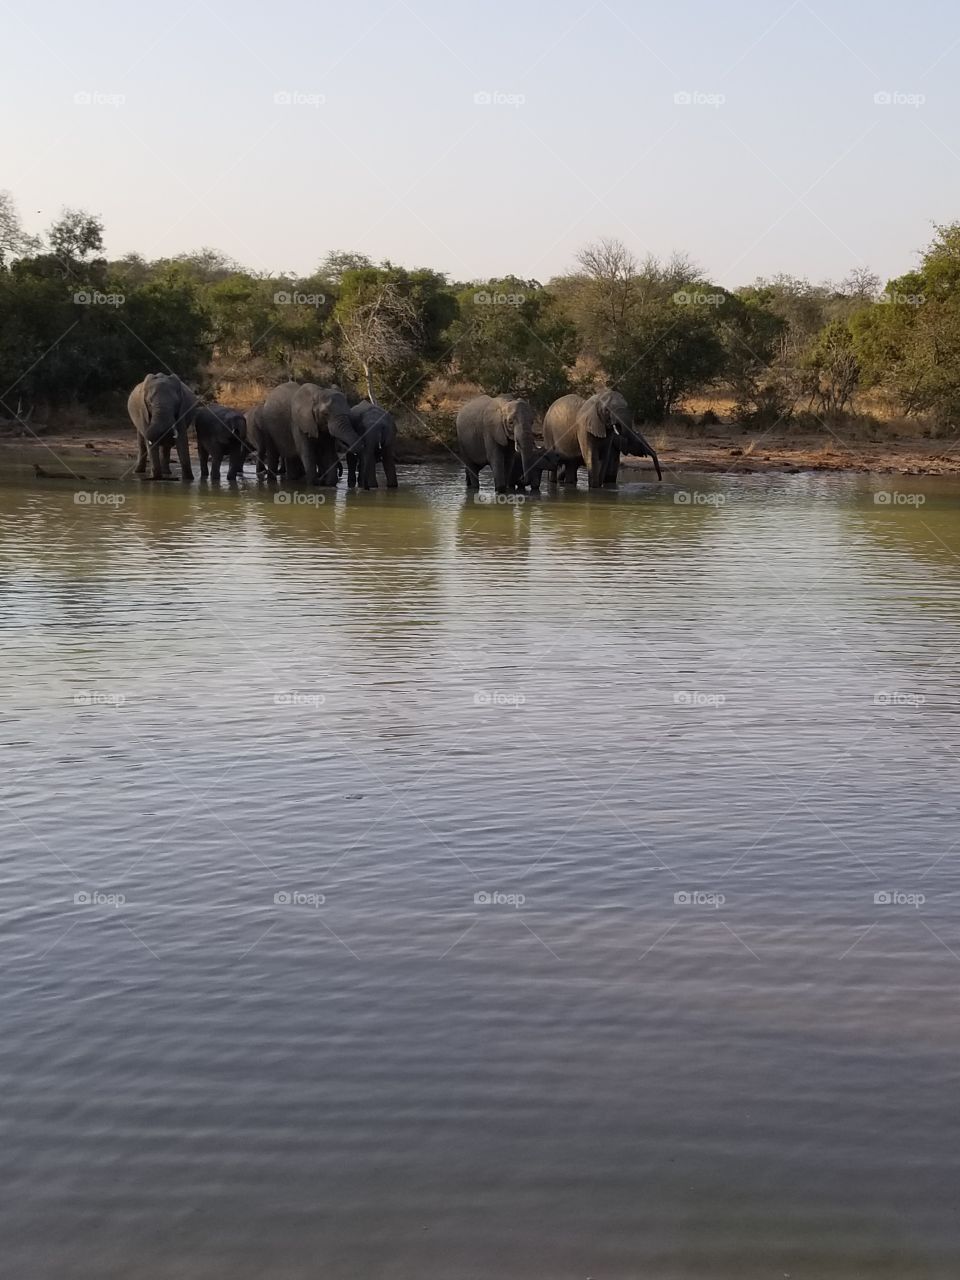 Elephants at the watering hole